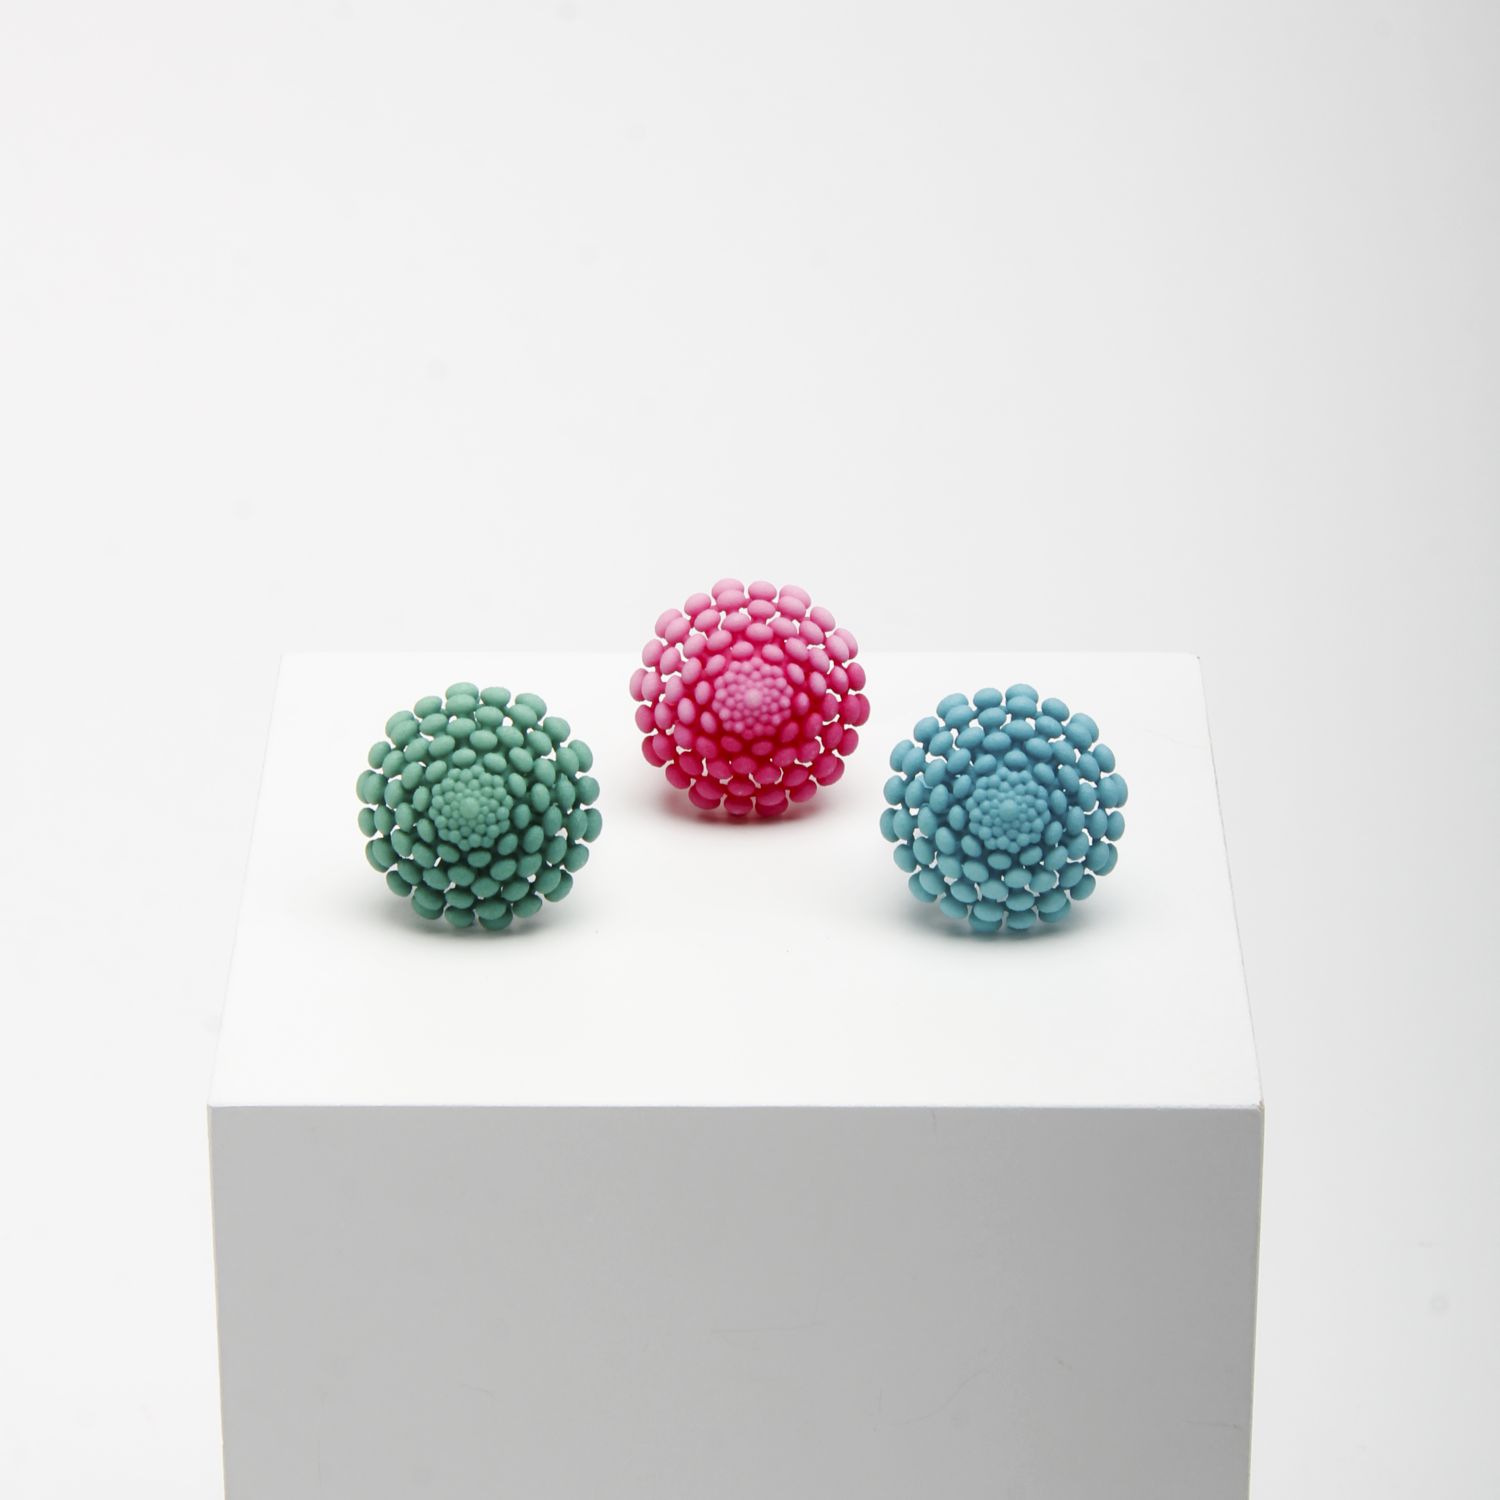 Kormar: Small Geometric Bloom Ring Product Image 1 of 5